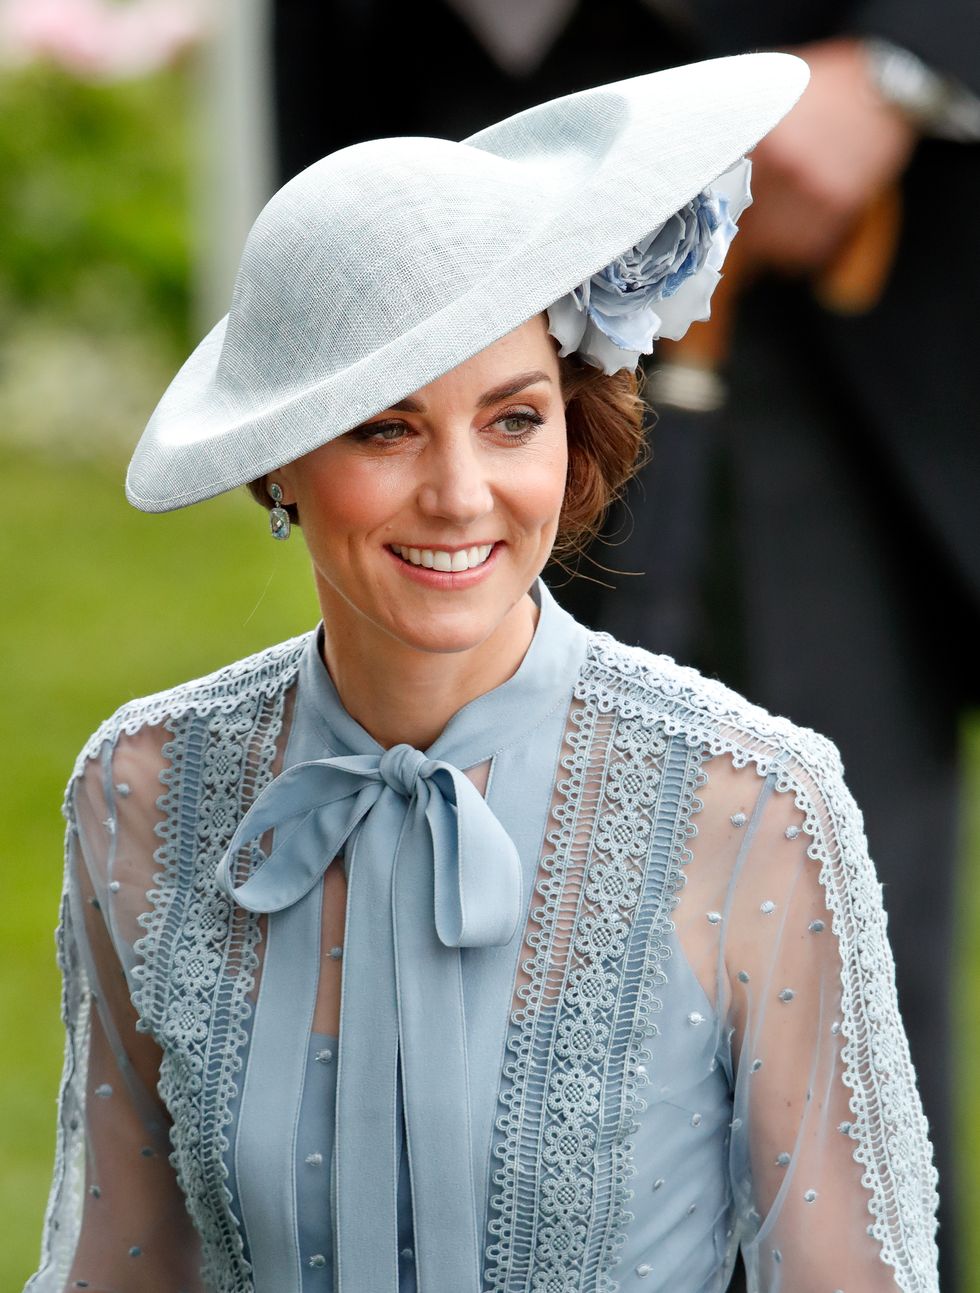 The Best Hats at Royal Ascot 2019 - Photos Of the Royal Family Wearing ...